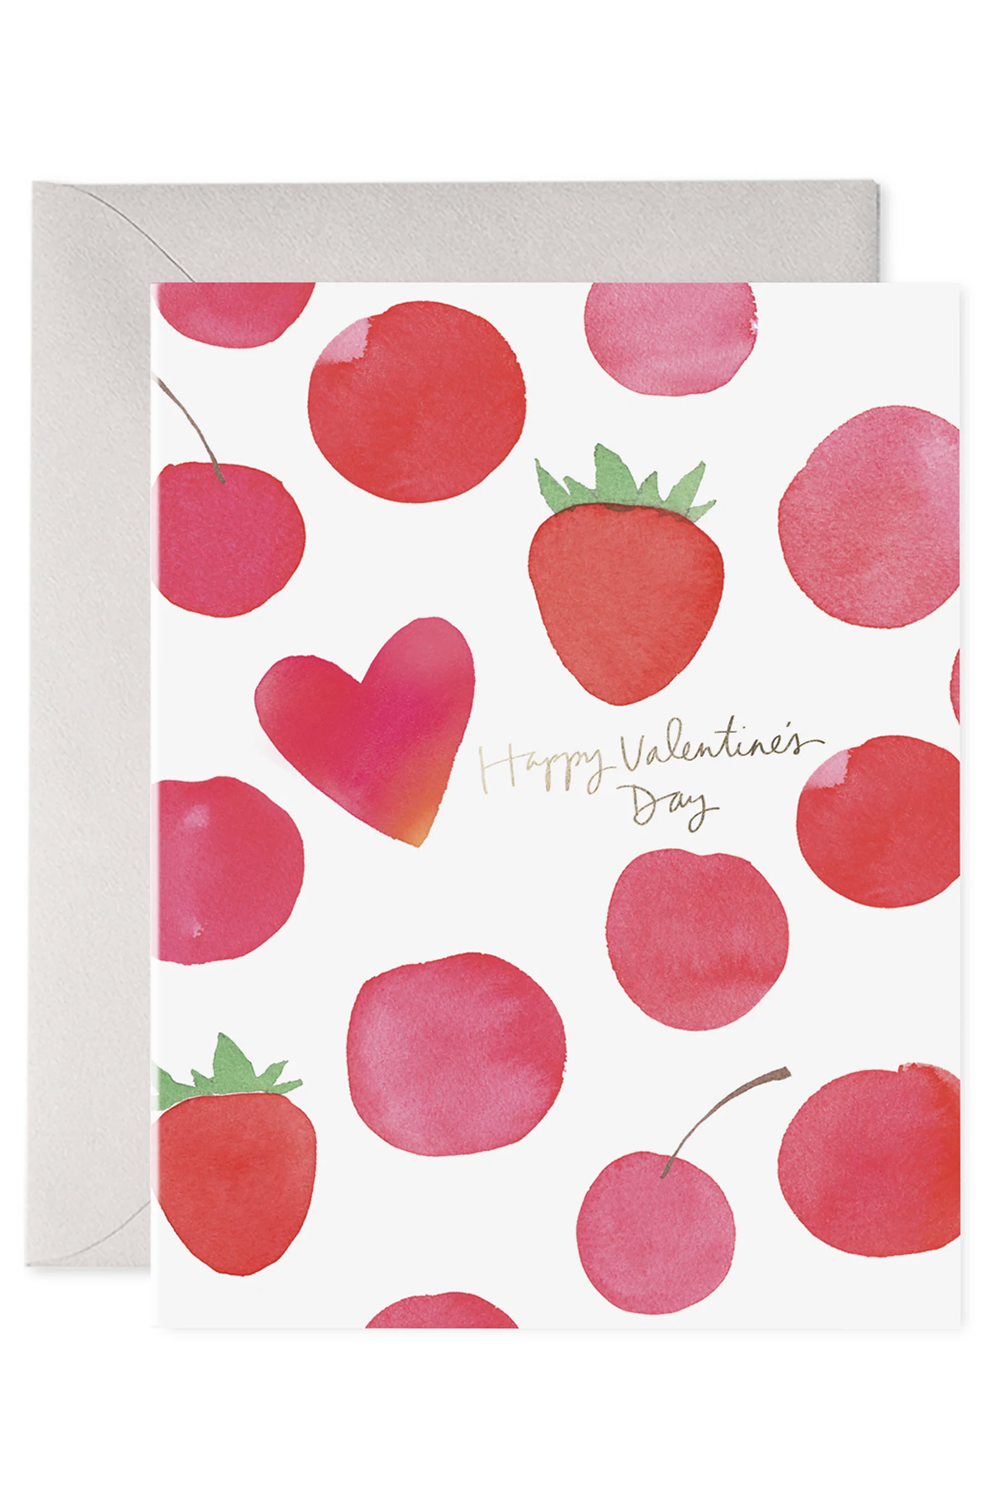 EFran Valentine's Day Greeting Card - Berry